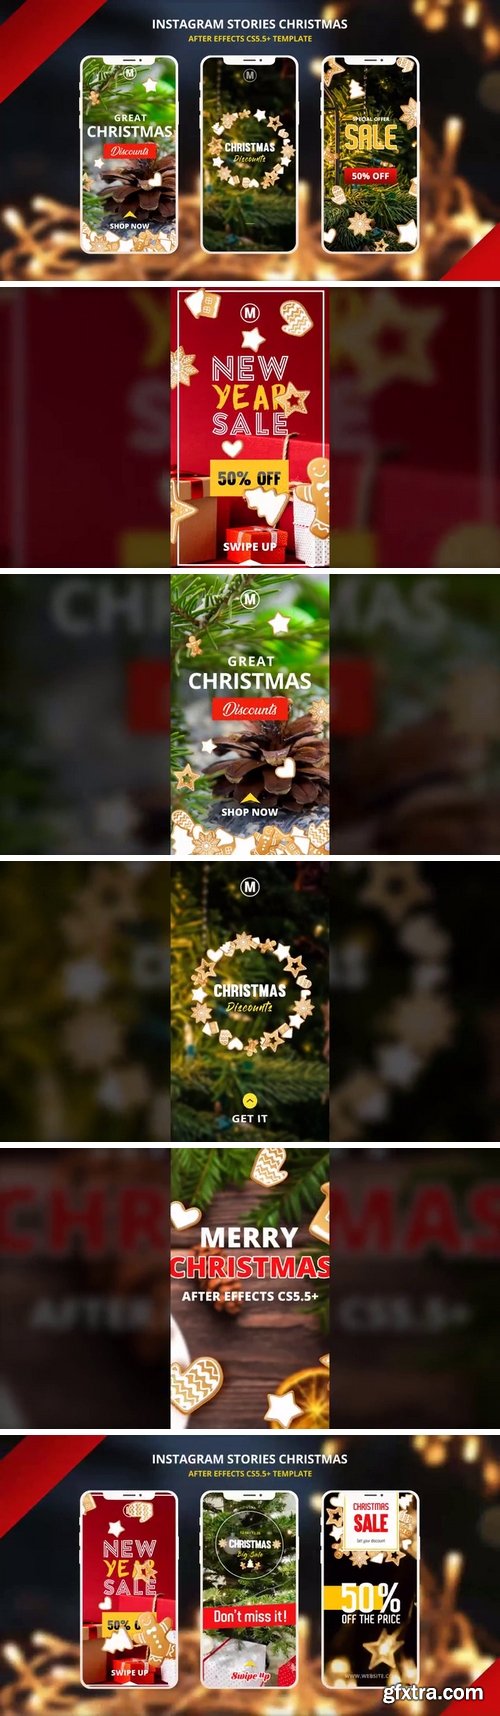 MA - Instagtam Christmas Stories After Effects Templates 150318